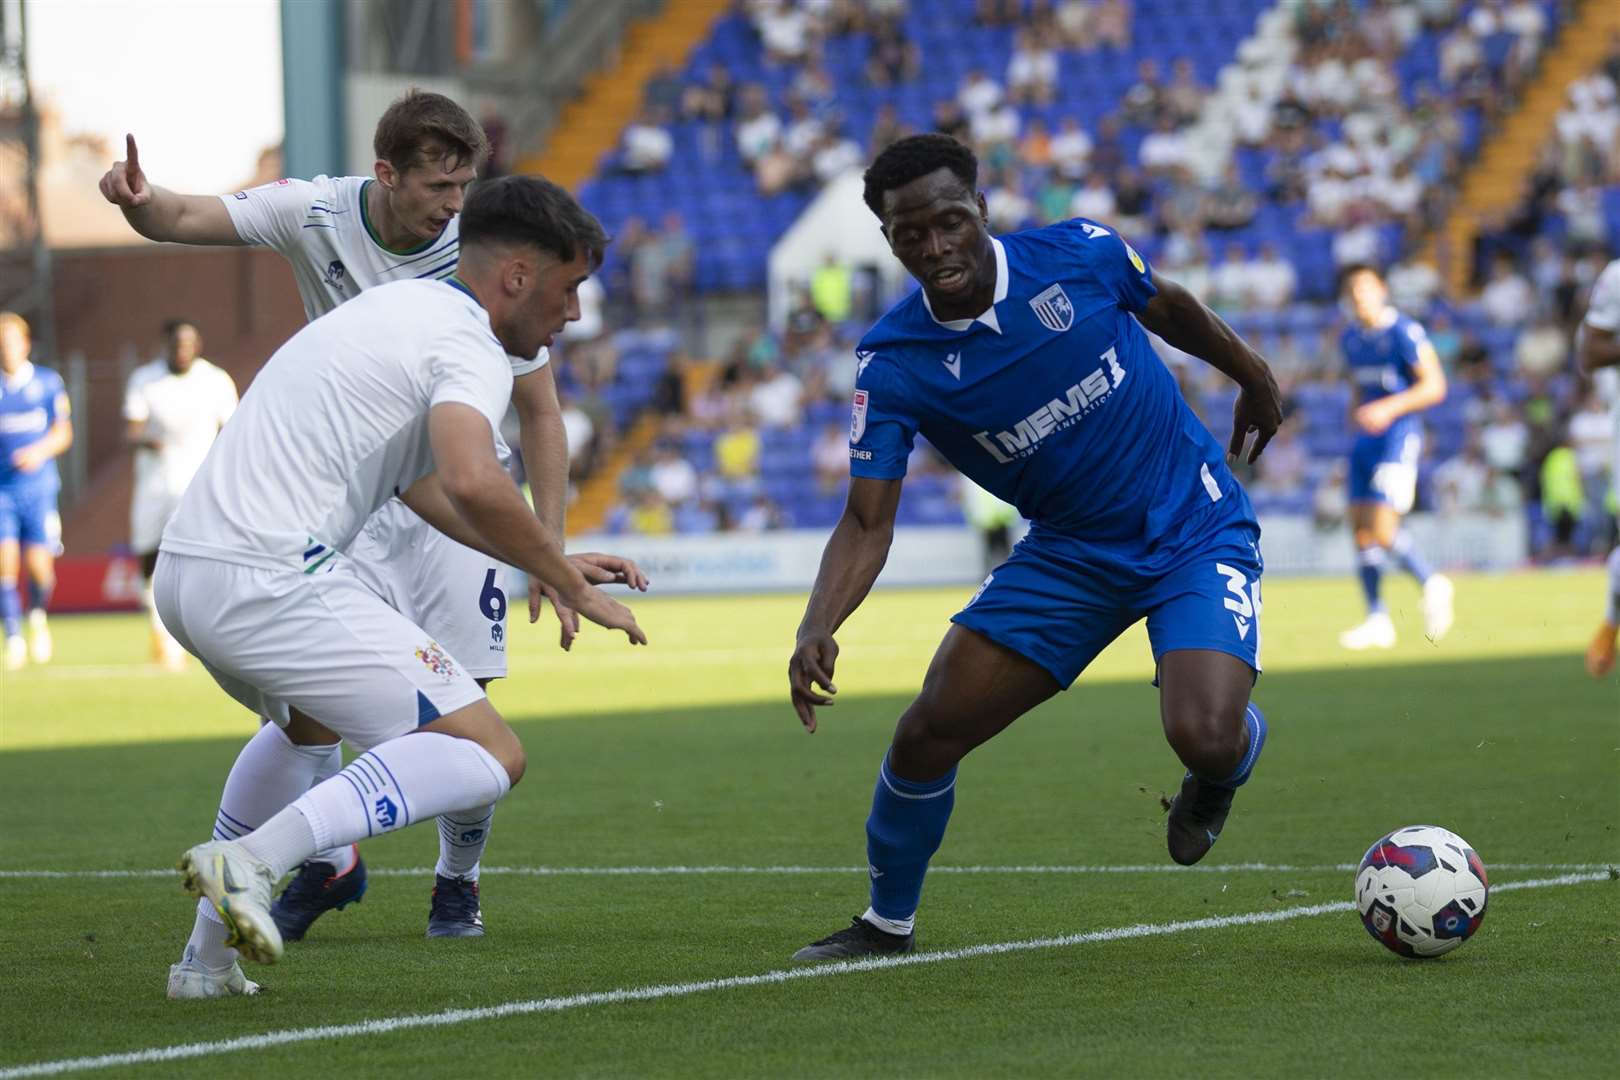 David Tutonda up against Tranmere Rovers earlier in the season